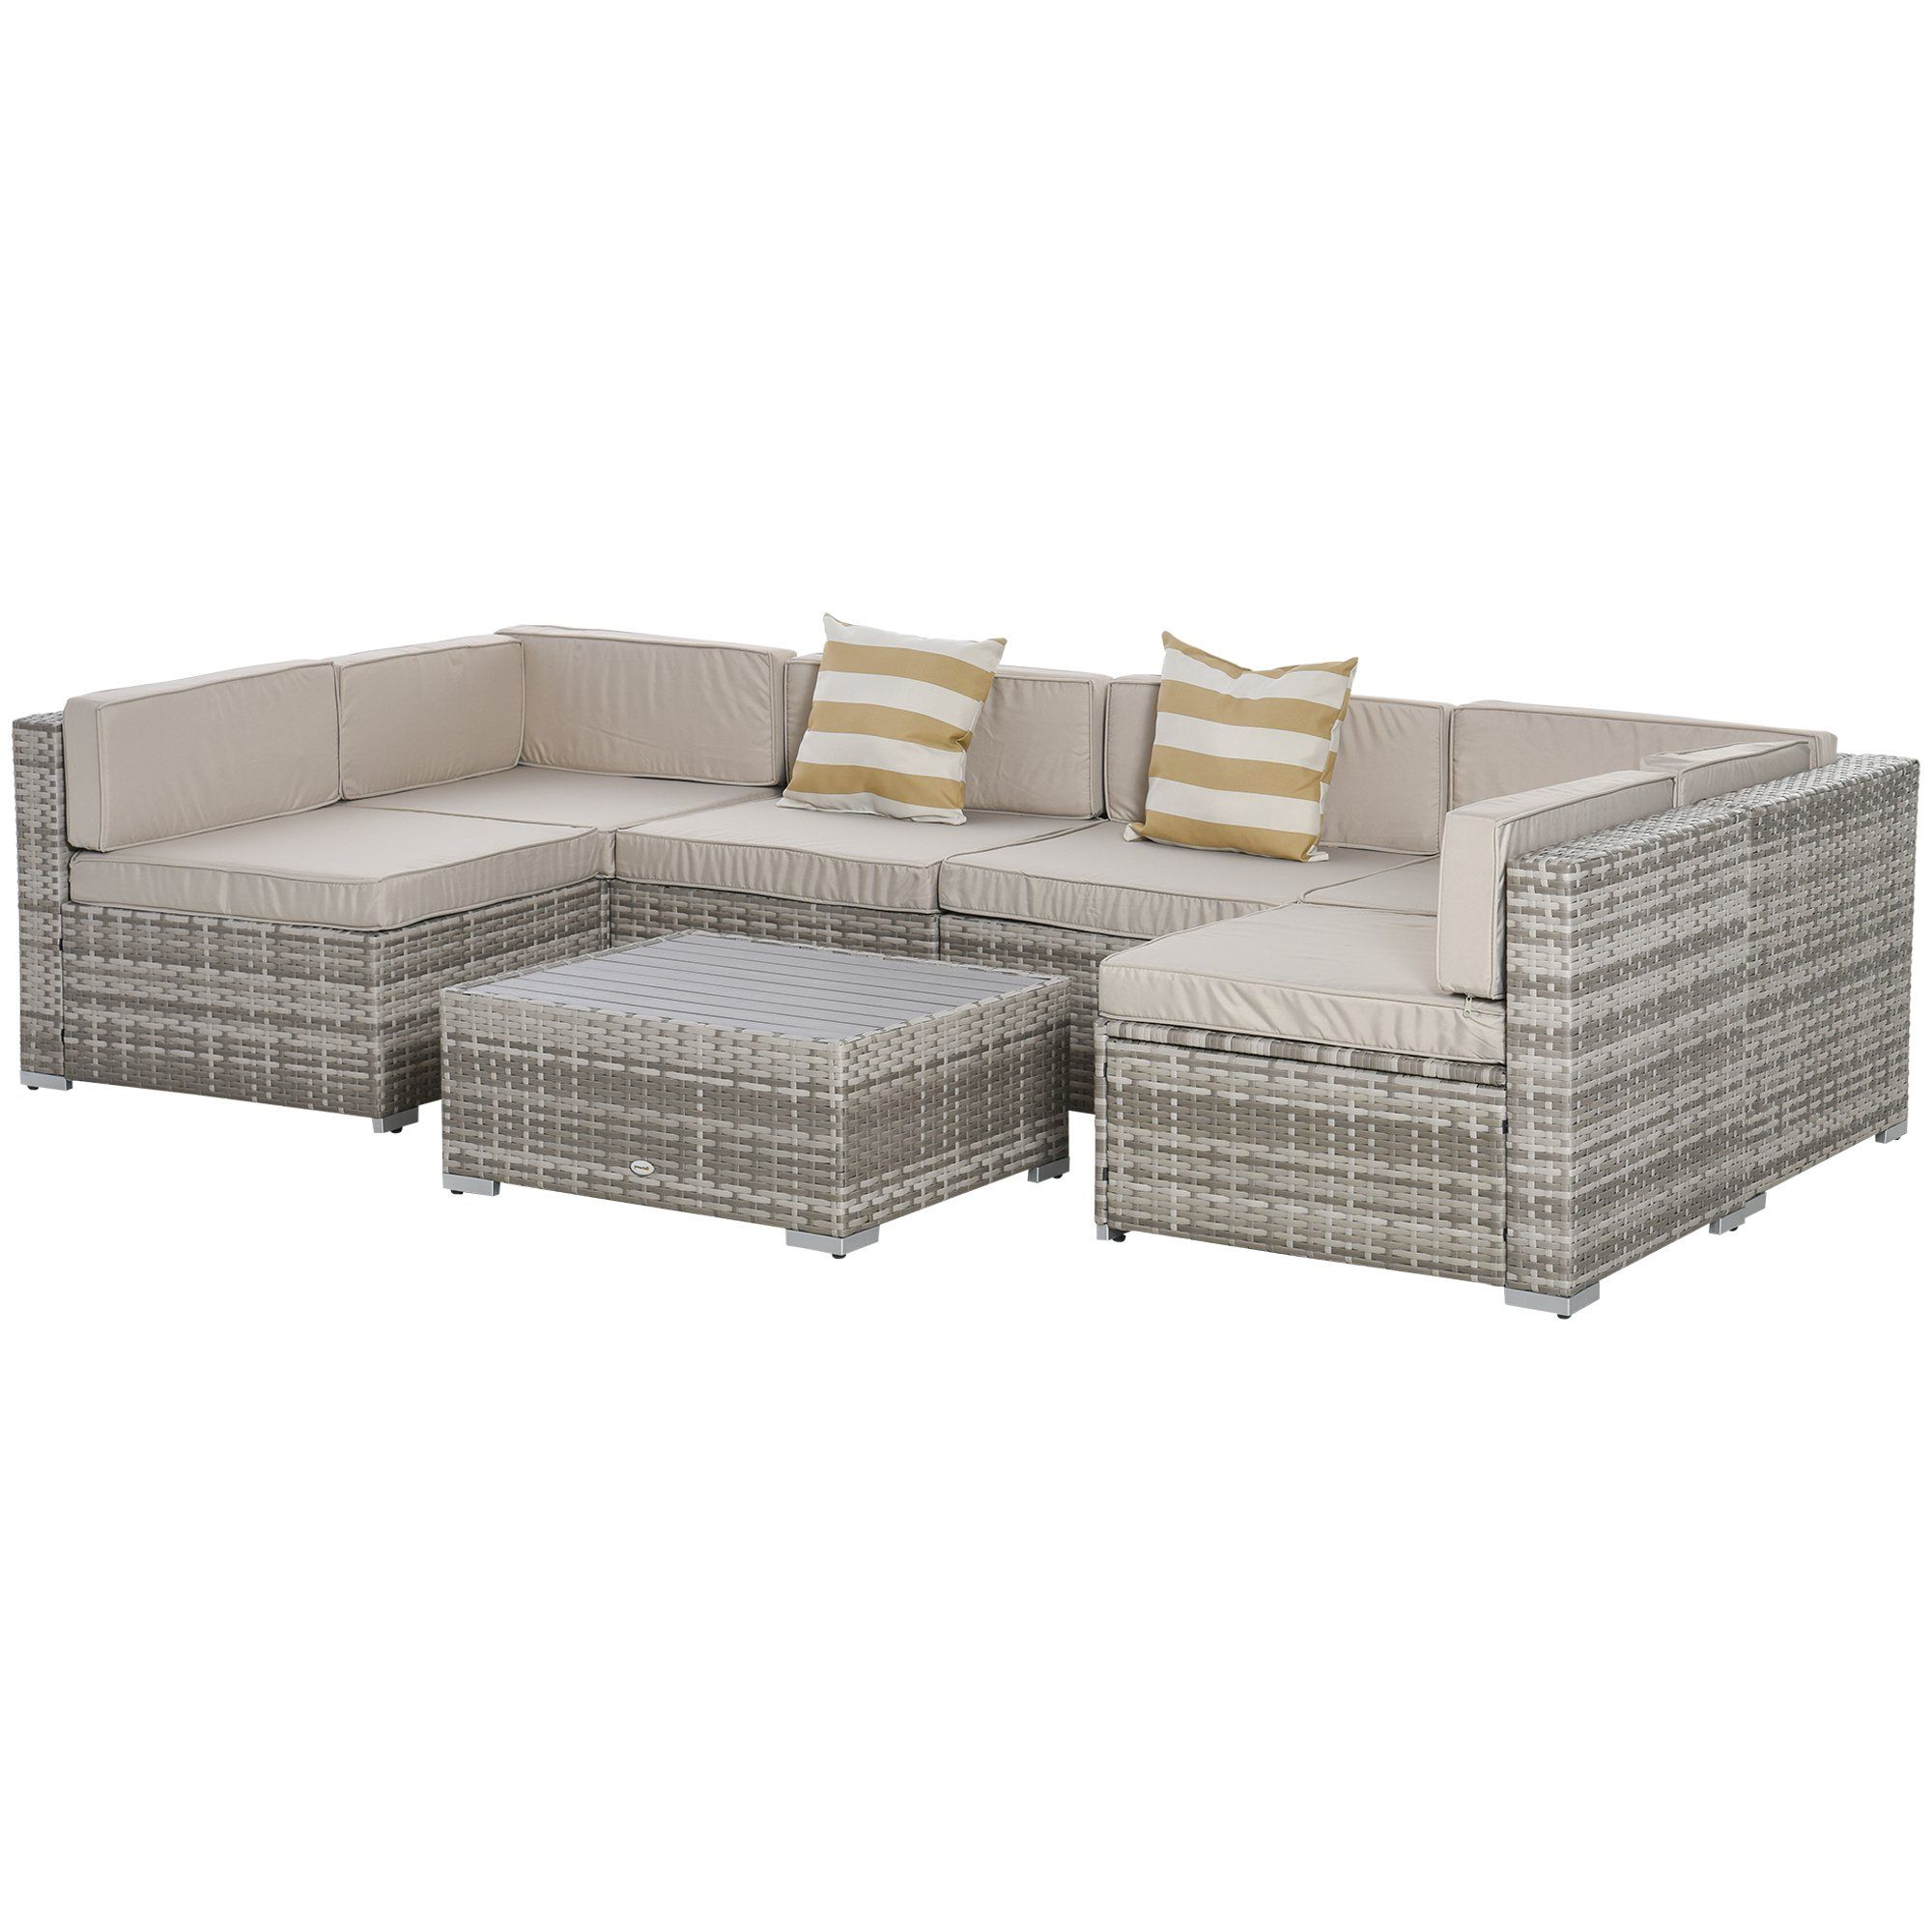 Outdoor Couch Cushions, Throw Pillows And Slat Coffee Table In Favorite Outsunny 7 Piece Outdoor Patio Set Outdoor Wicker Patio Sofa Set Modern  Rattan Conversation Furniture Set With Cushions Pillows And Tea Table Beige  Low Back Chair Sectional (View 5 of 15)